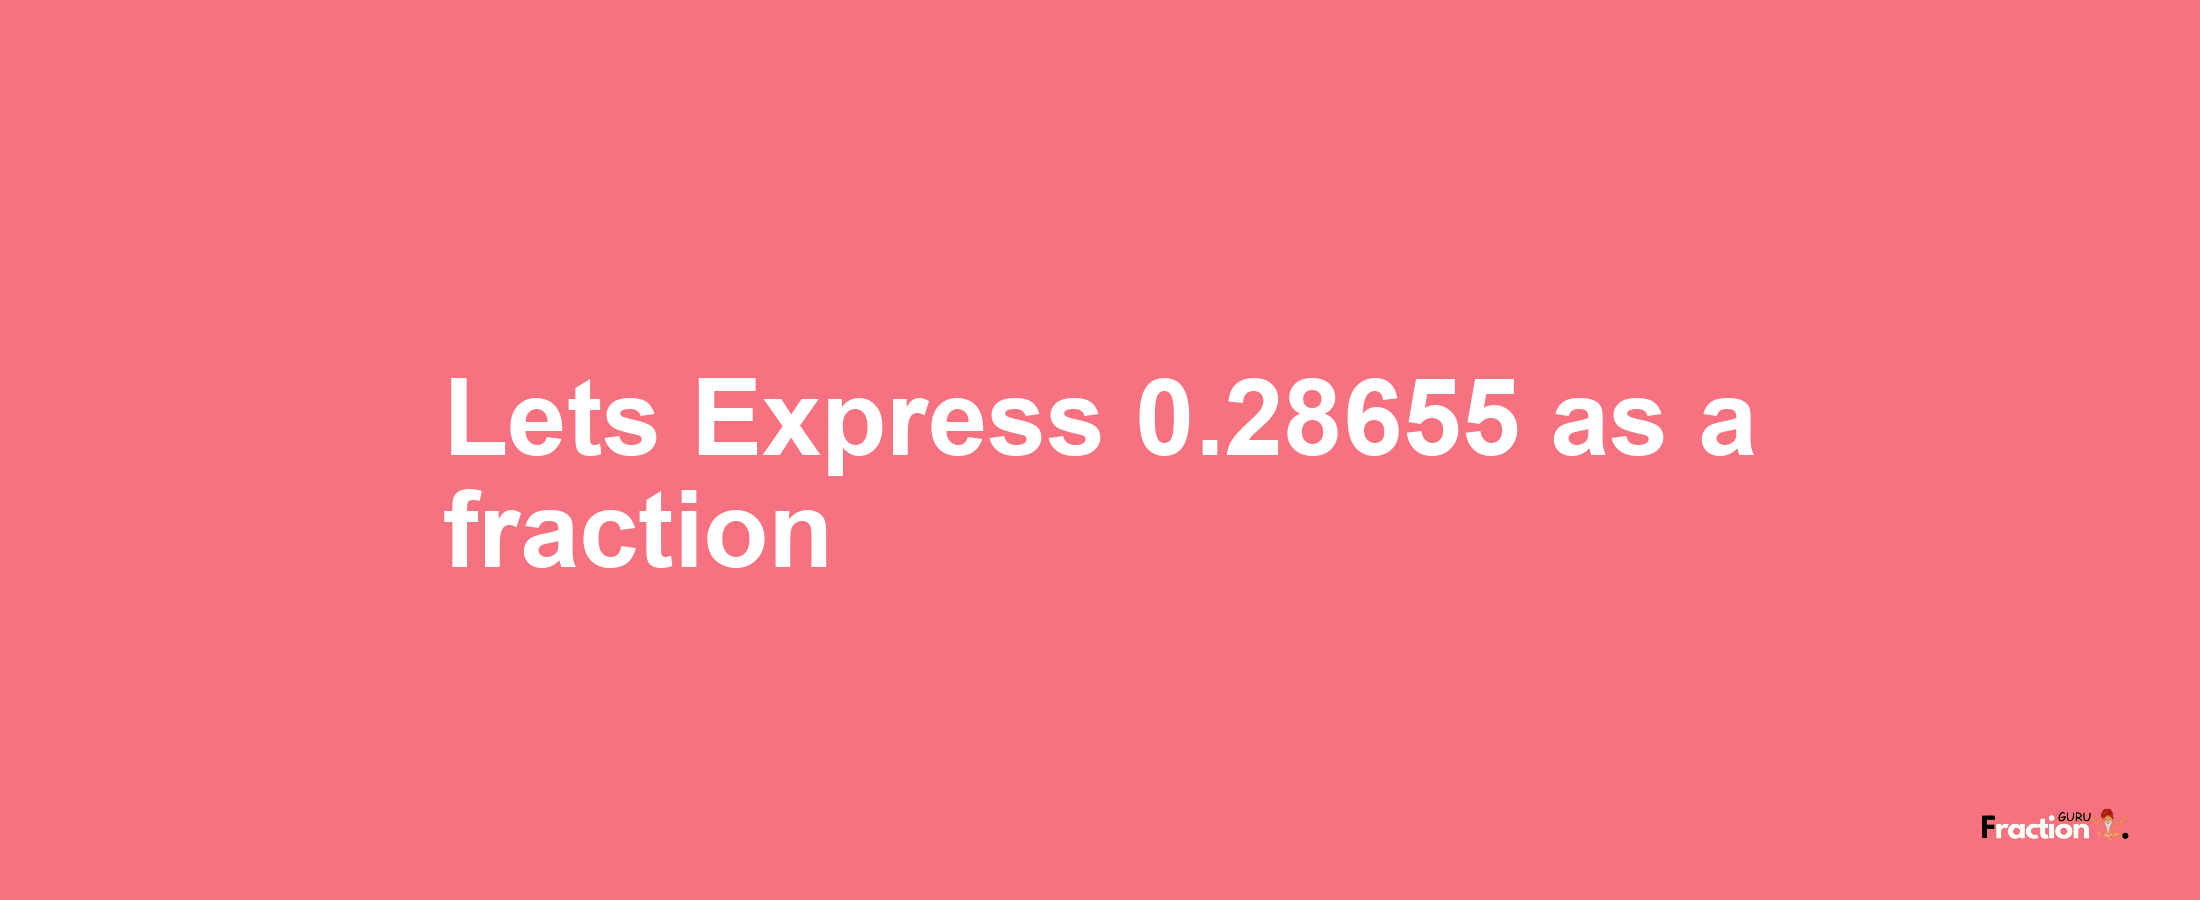 Lets Express 0.28655 as afraction